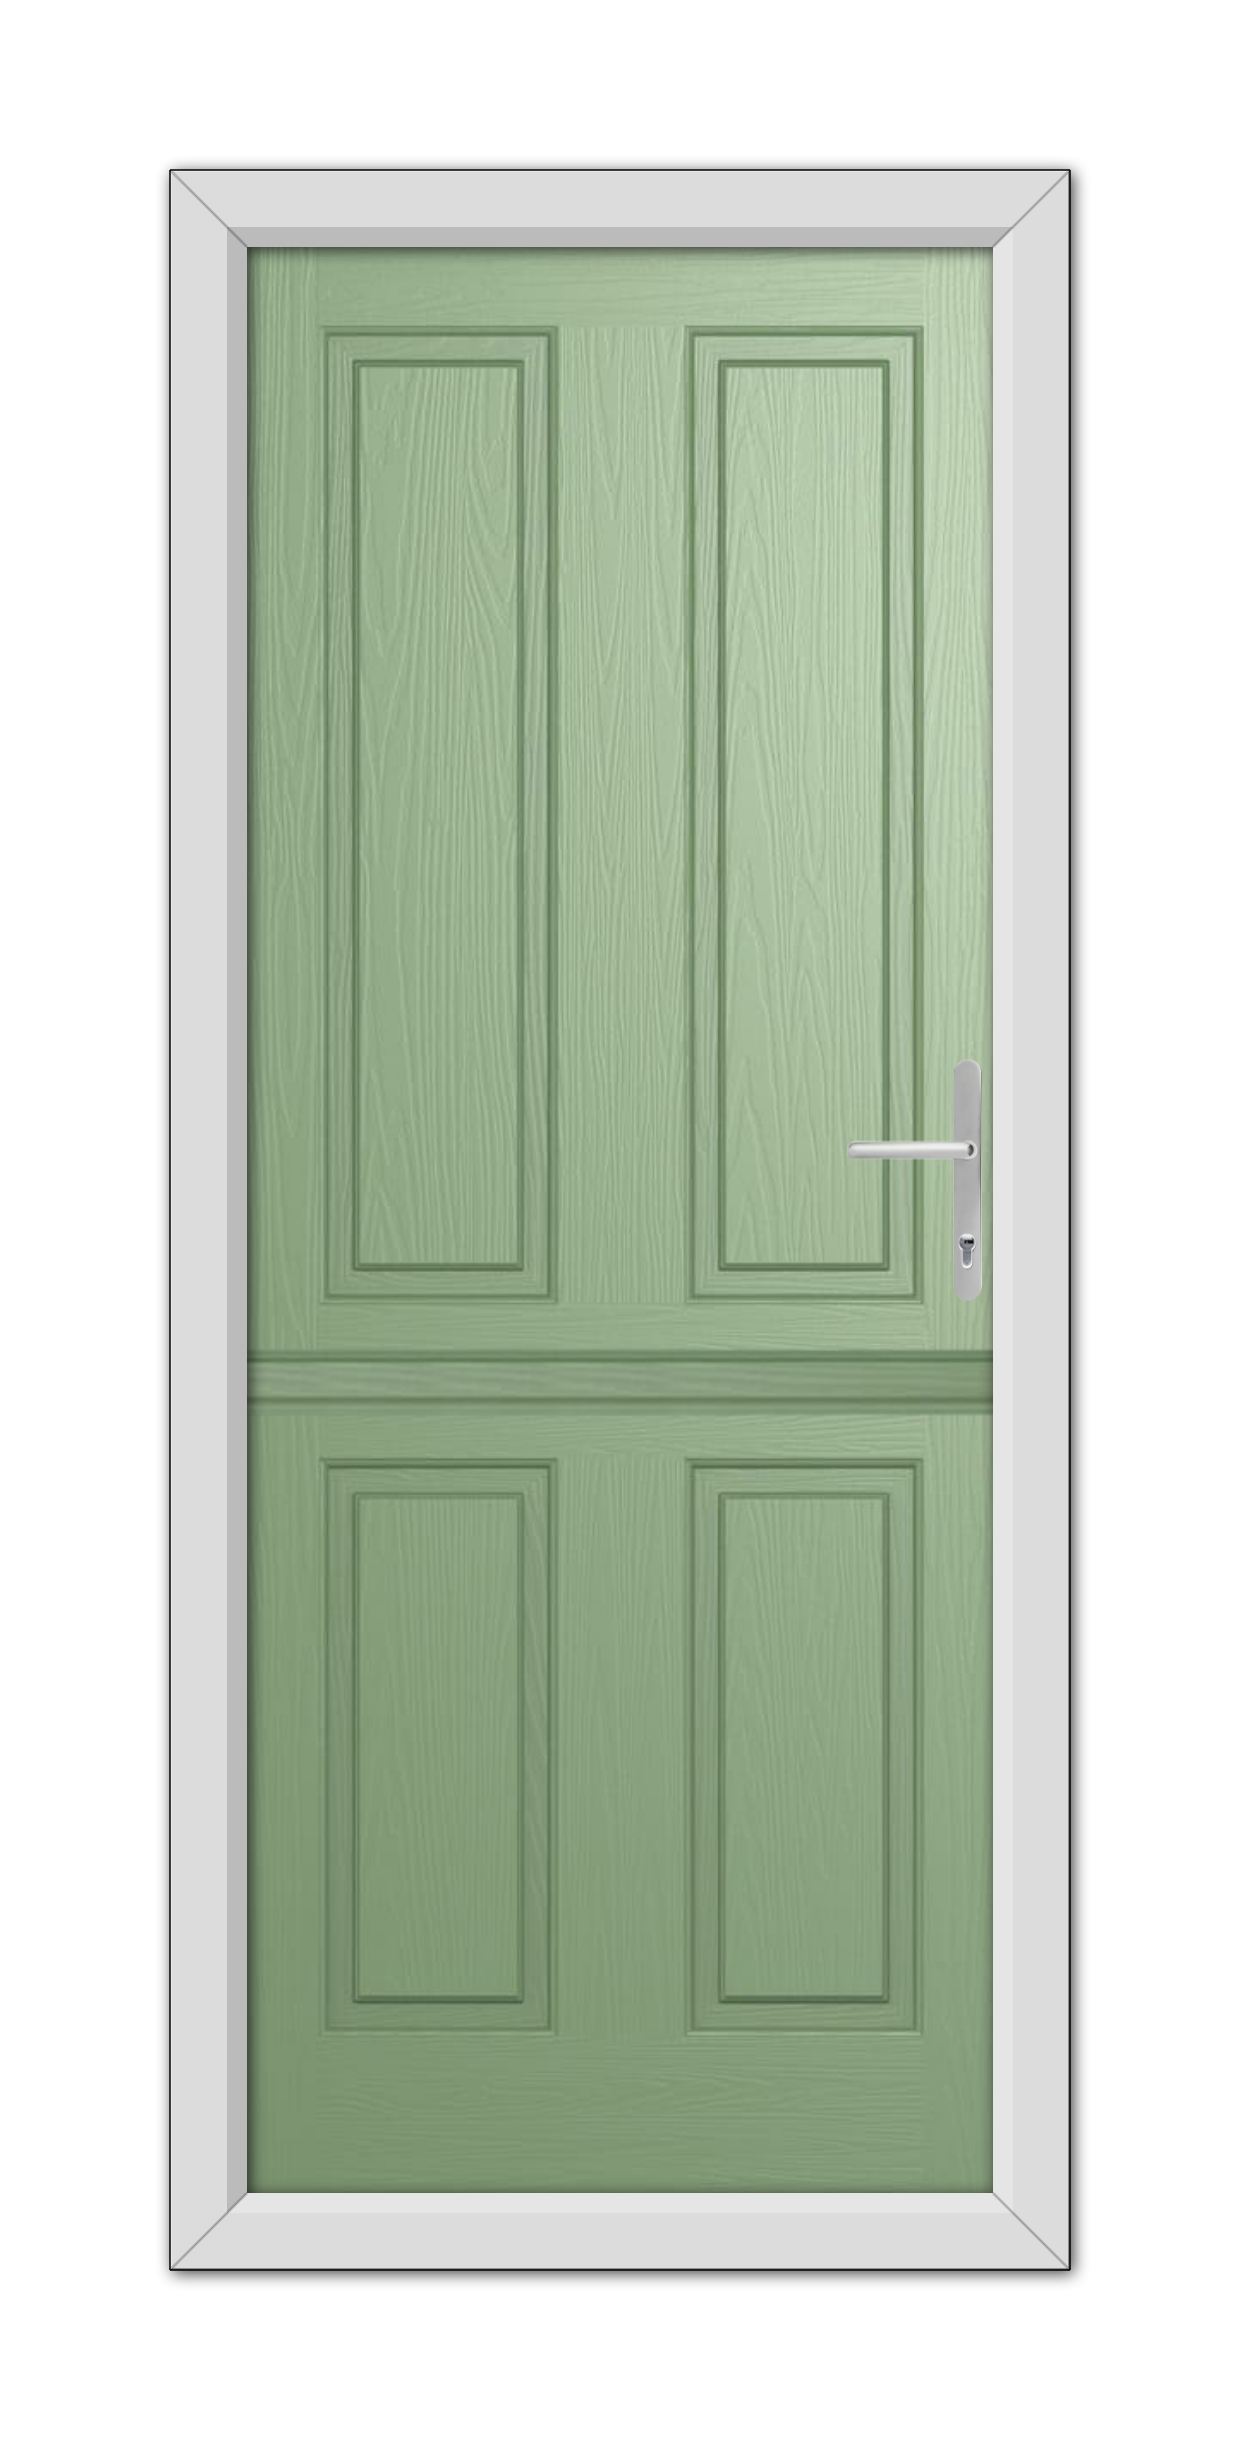 A Chartwell Green Whitmore Solid Stable Composite Door 48mm Timber Core with a silver handle, framed within a white door frame, shown against a simple background.